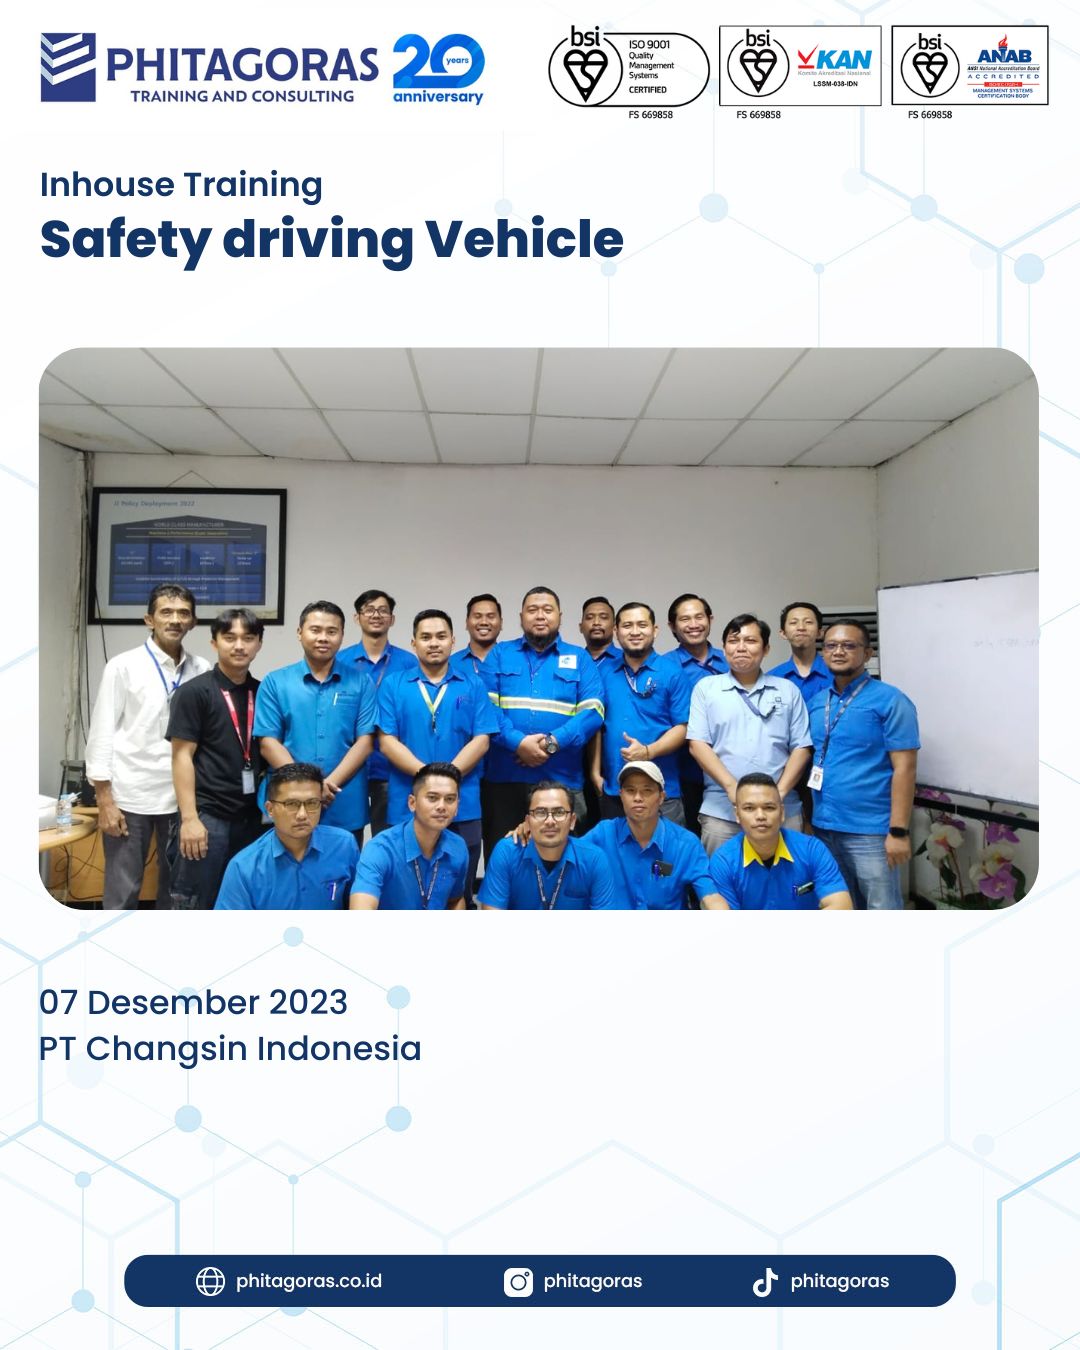 Inhouse Training Safety Driving Vehicle - PT Changsin Indonesia